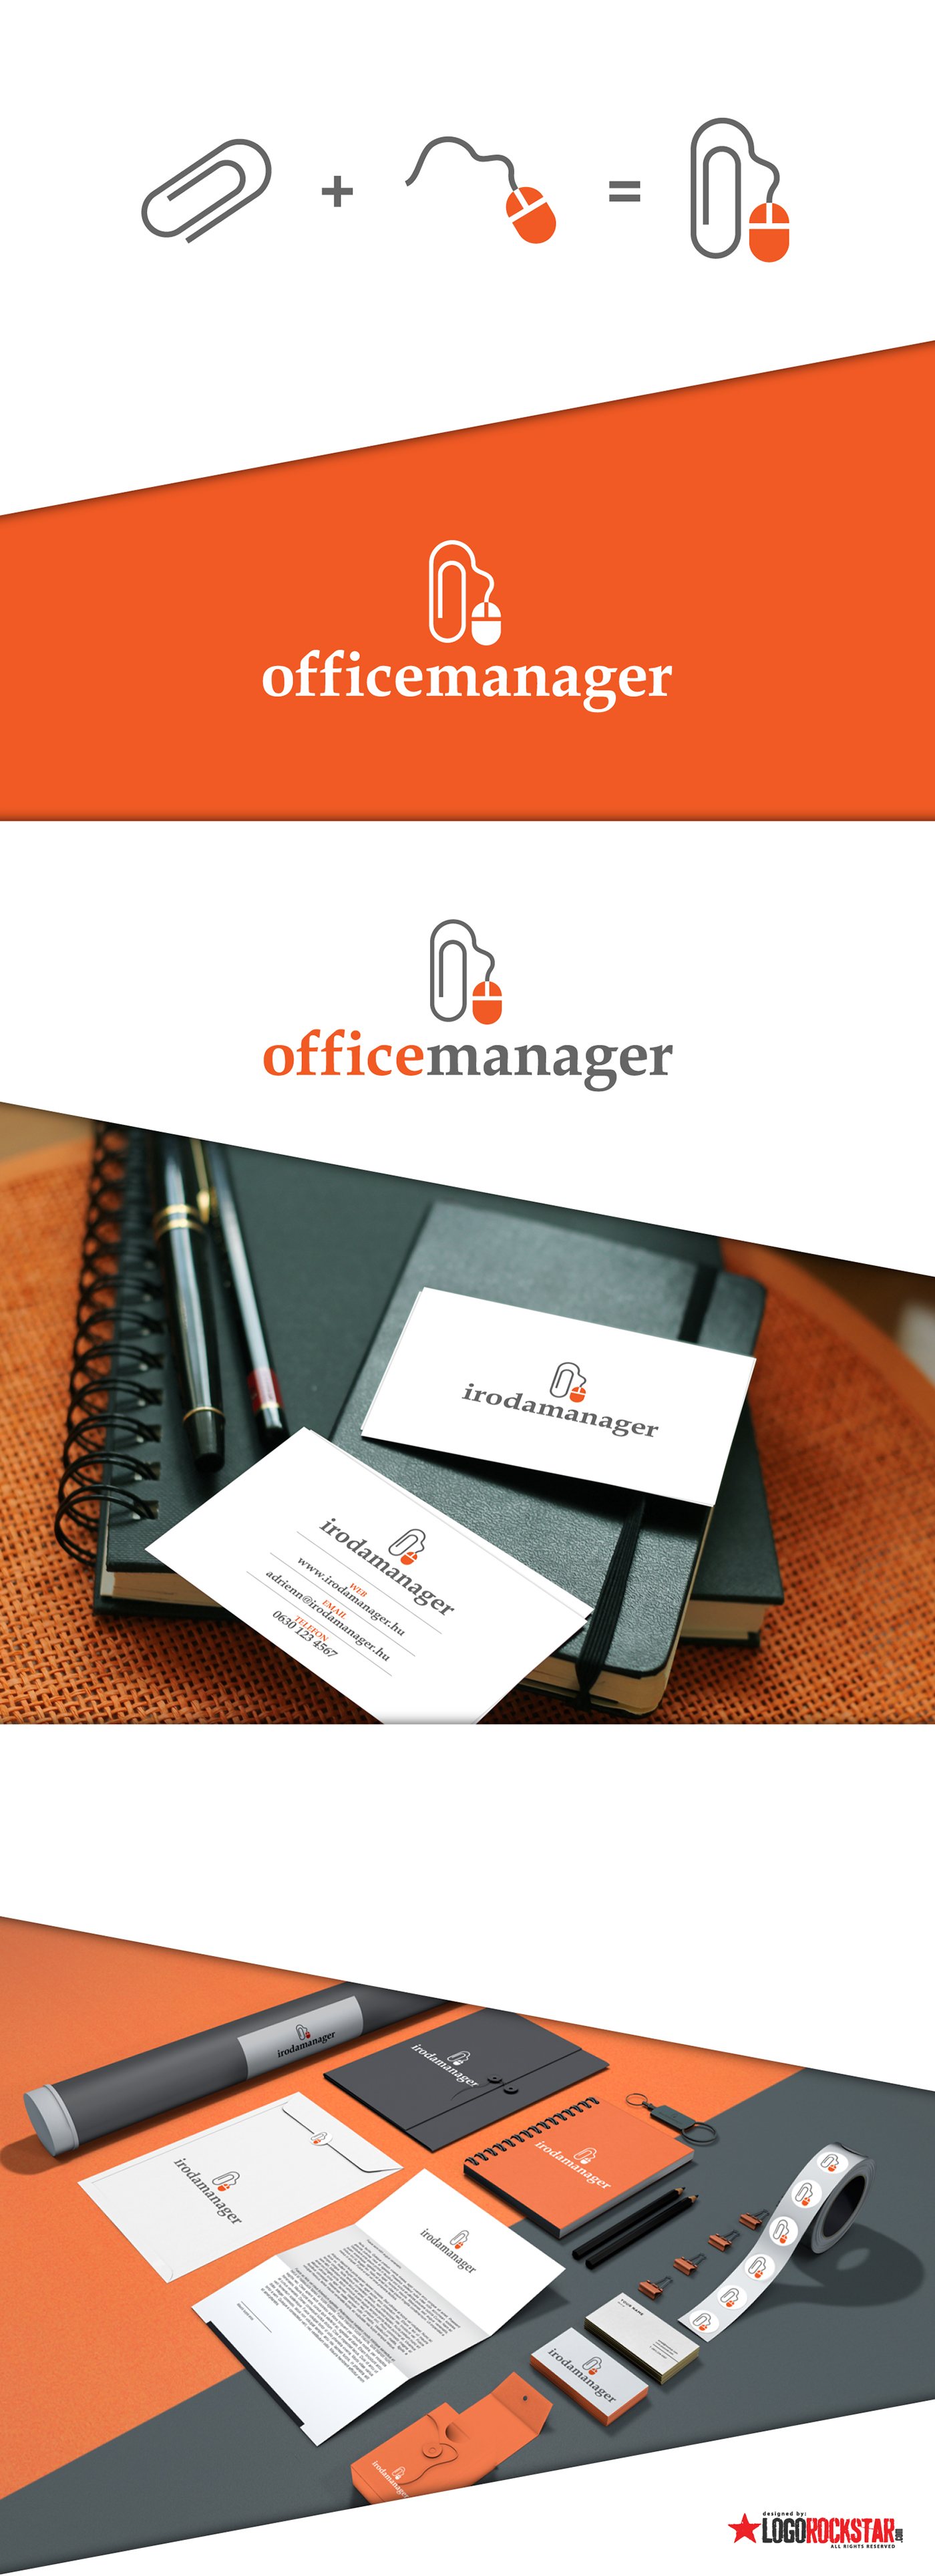 Office manager online paper clip mouse secretary